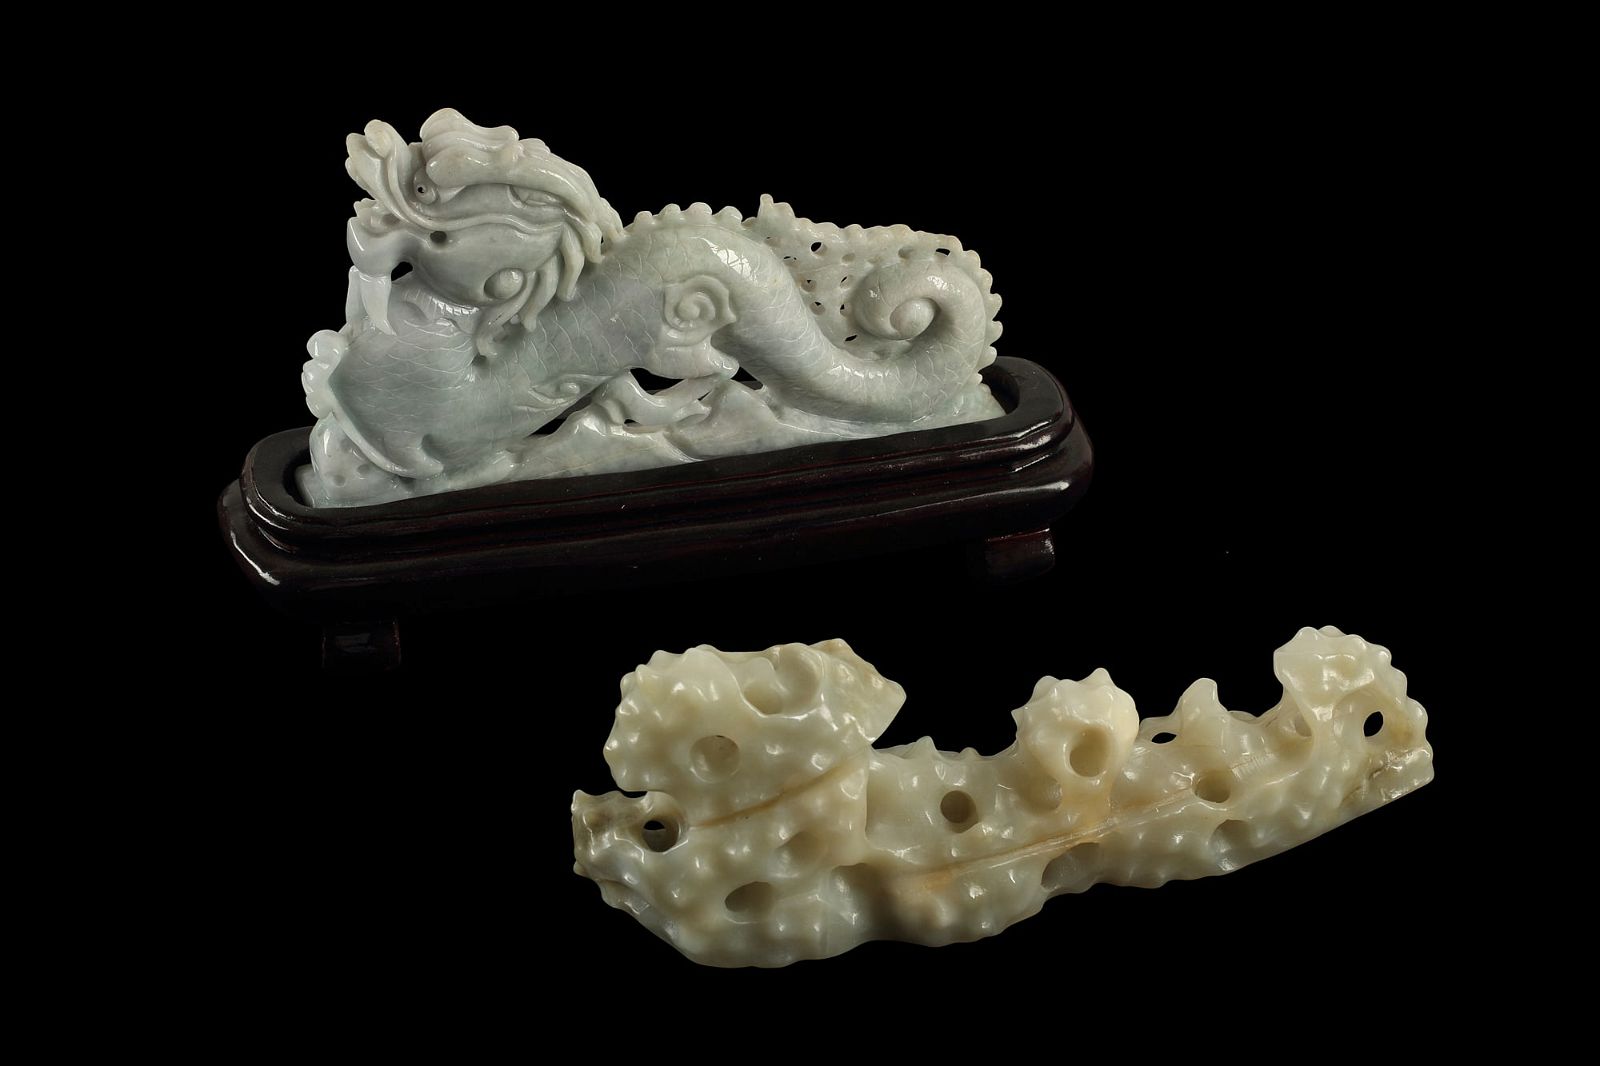 TWO CHINESE CARVED JADE DECORATIONSTwo 2fb3daf